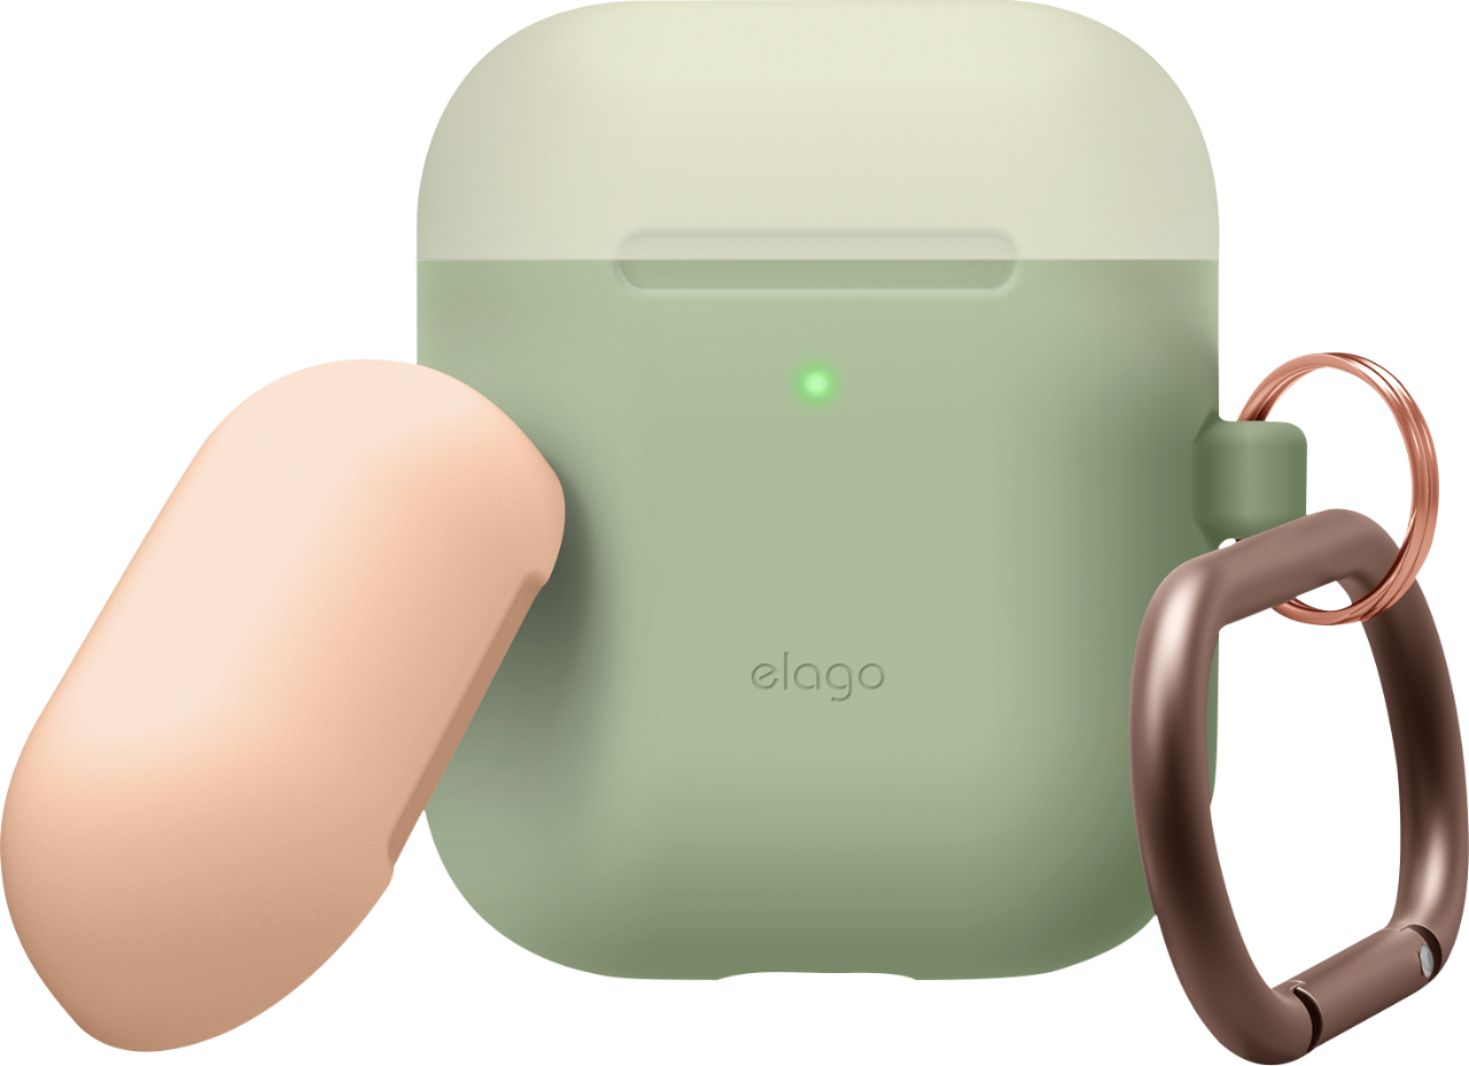 elago Silicone AirPods 3rd Generation Case [8 Colors]